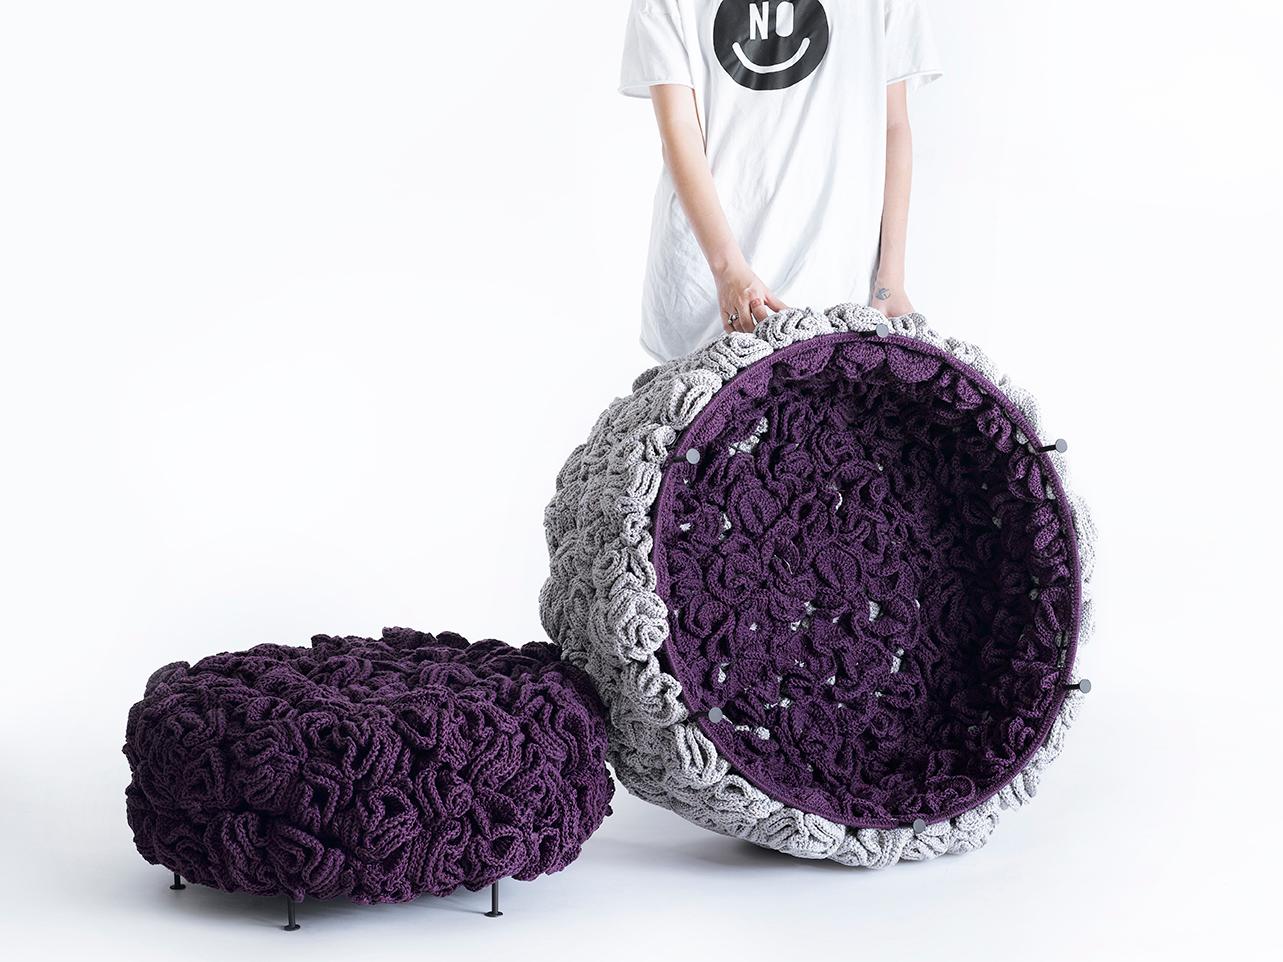 The Elements Pouf creates harmony in various spaces: living rooms, bedrooms and walk in closets.

On top of sturdy black iron structure, the textile cover of the pouf is elegant, composed of dozens of hand knit flower-like elements, made from